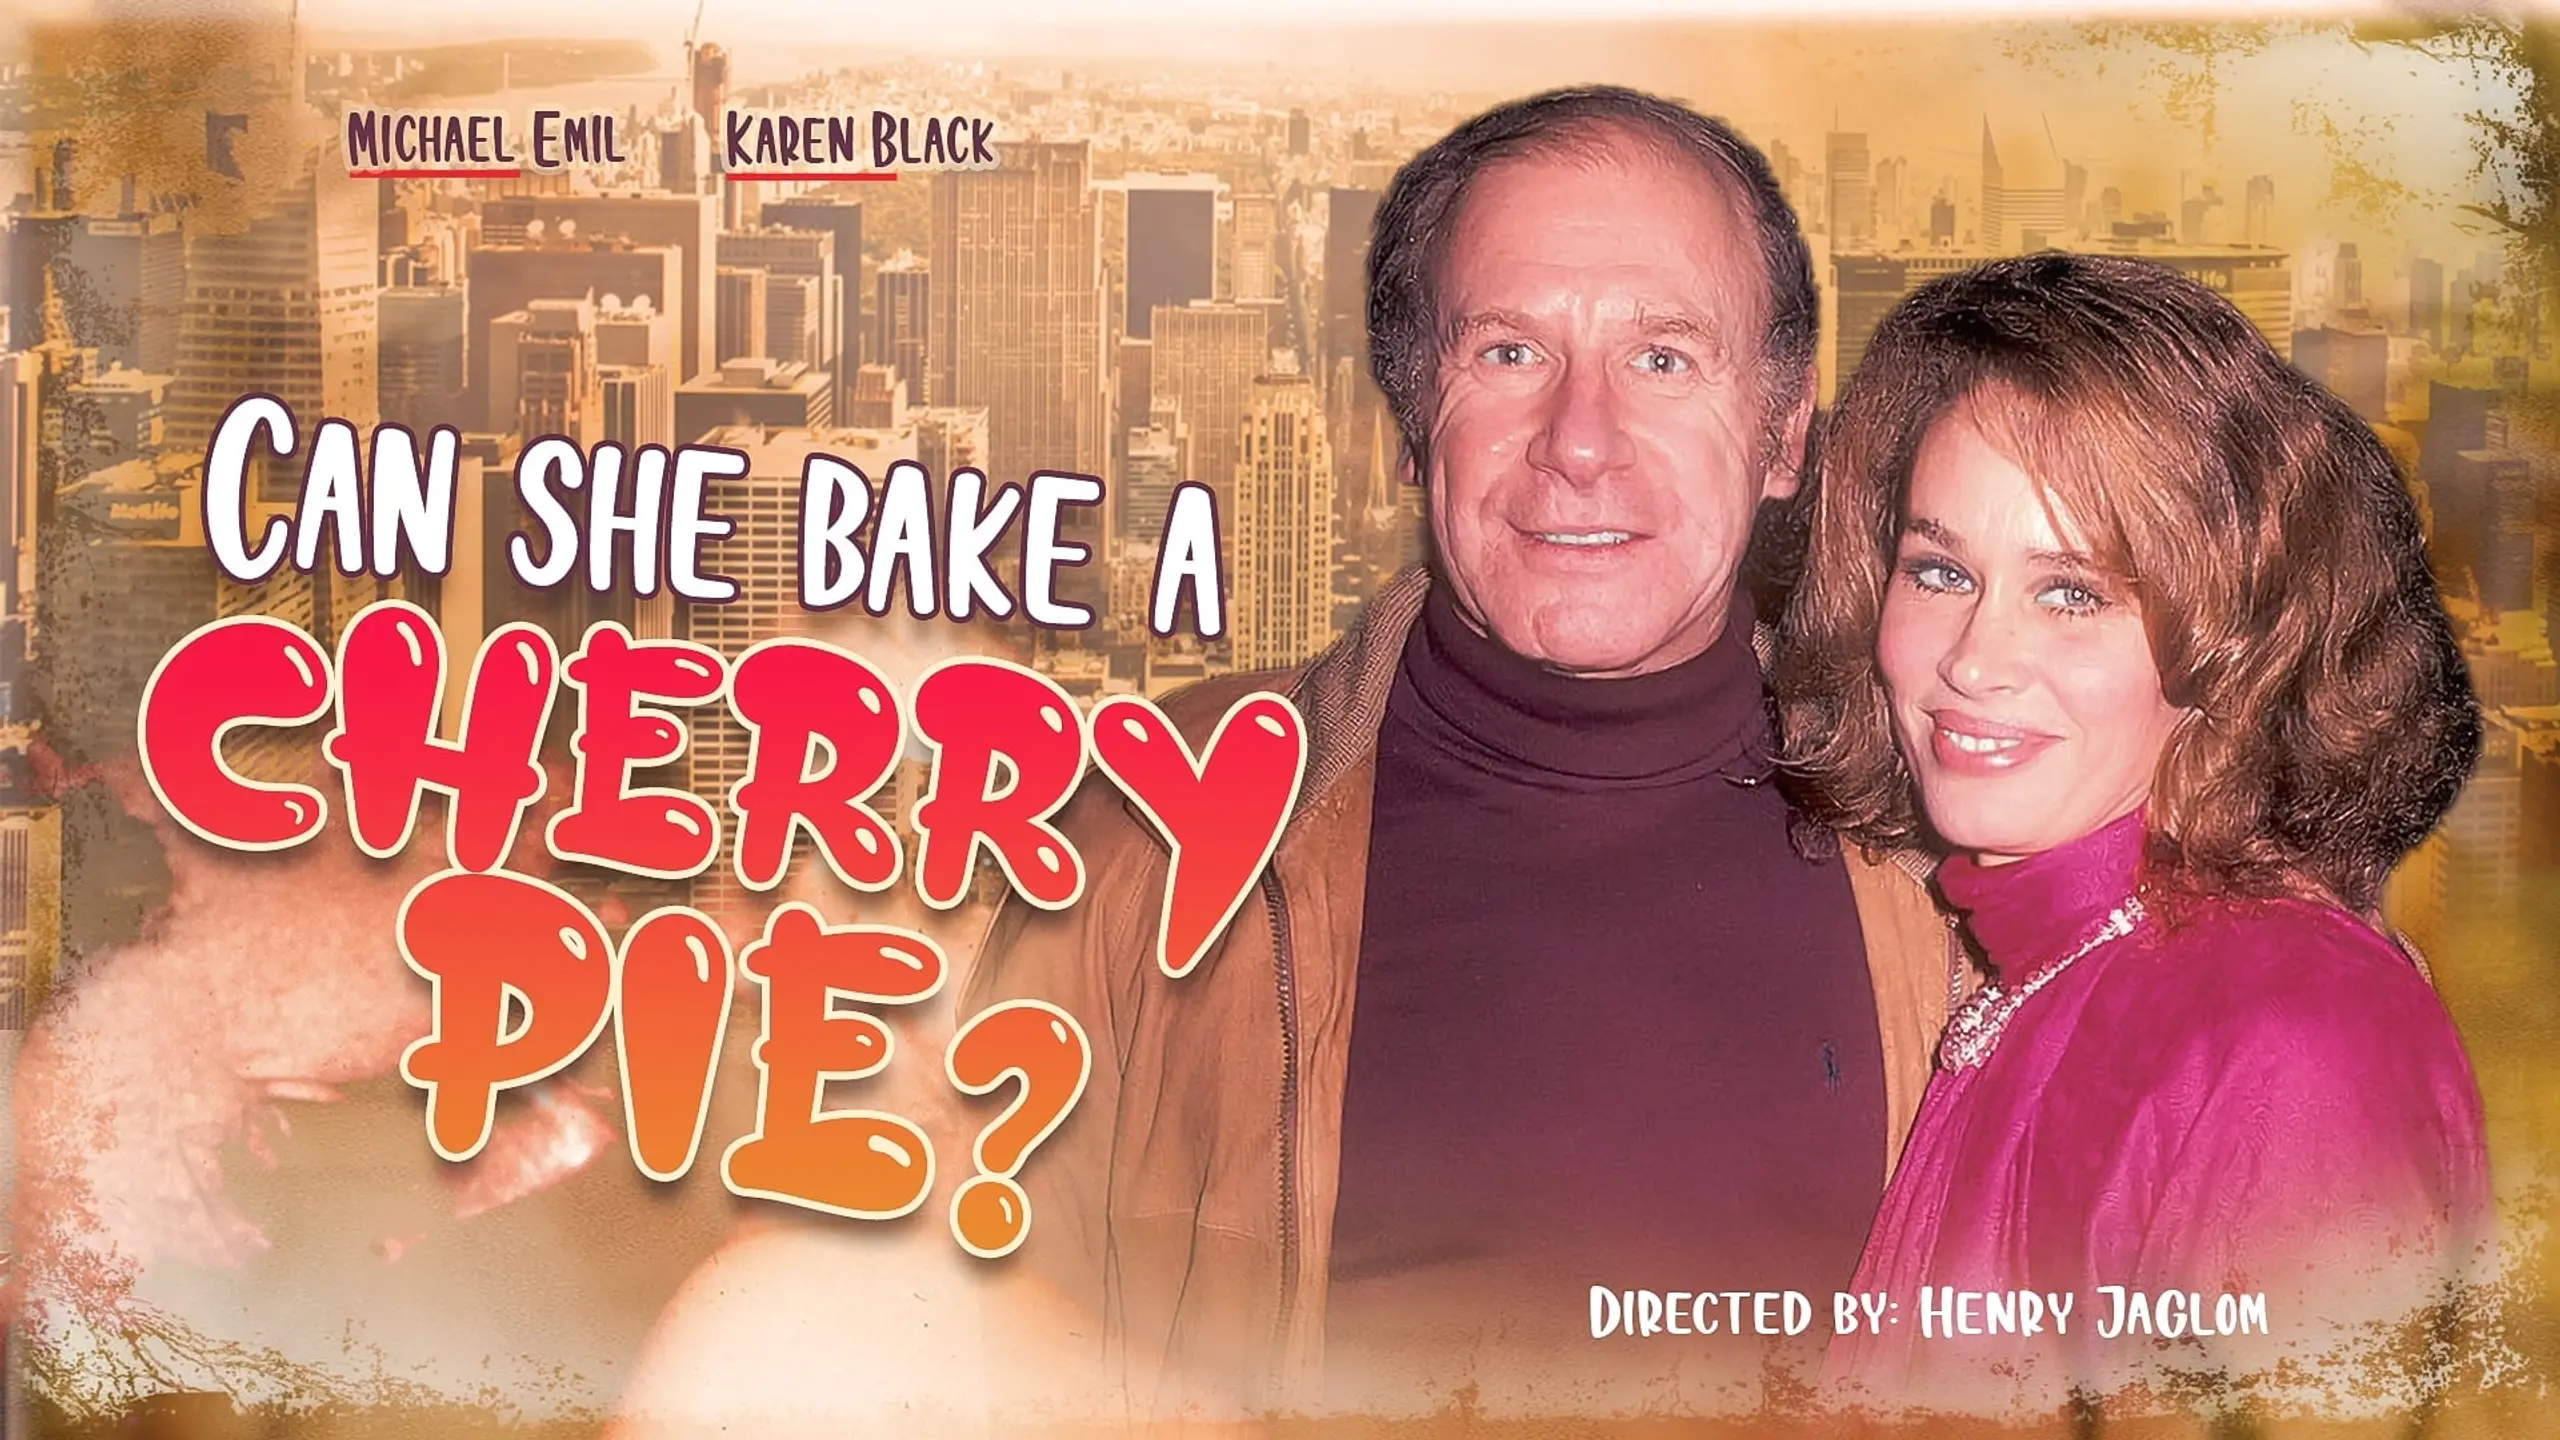 Can She Bake A Cherry Pie?